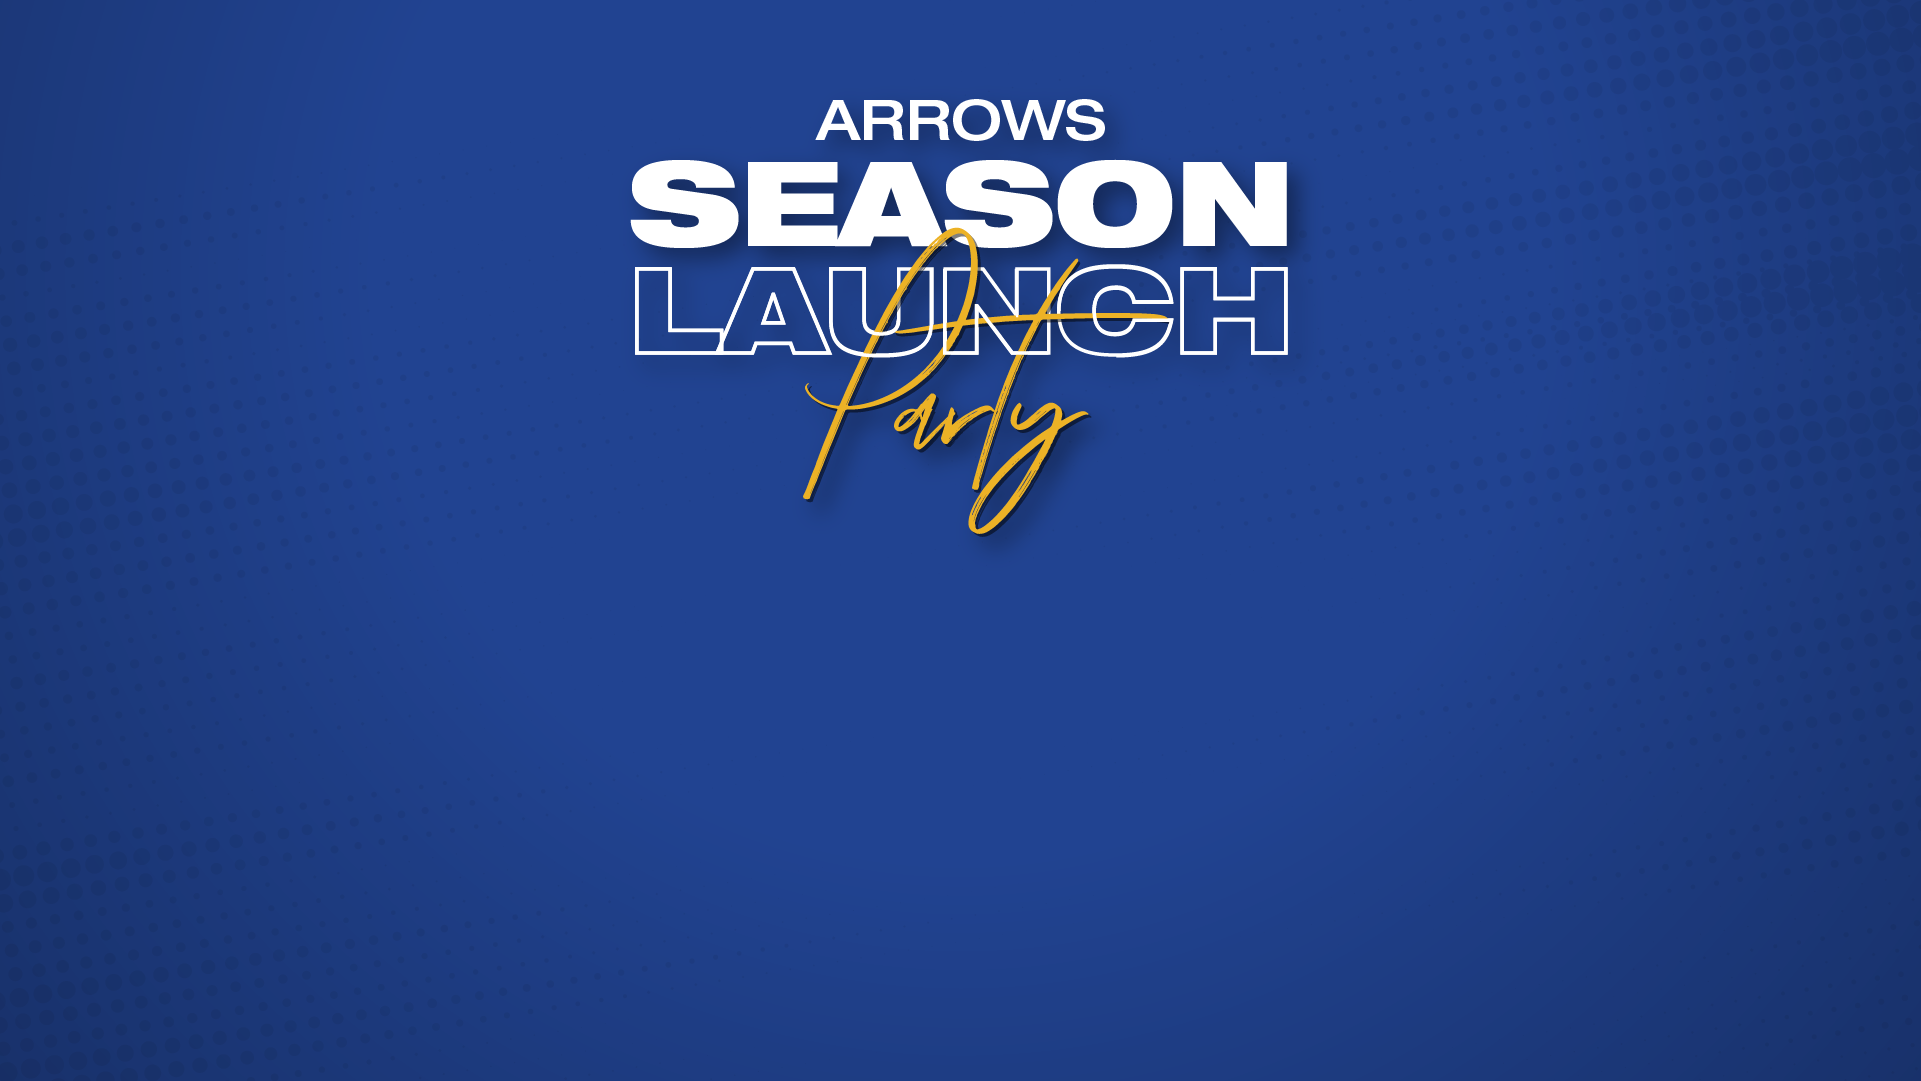 Join Us for the Arrows 2021 Season Launch Party